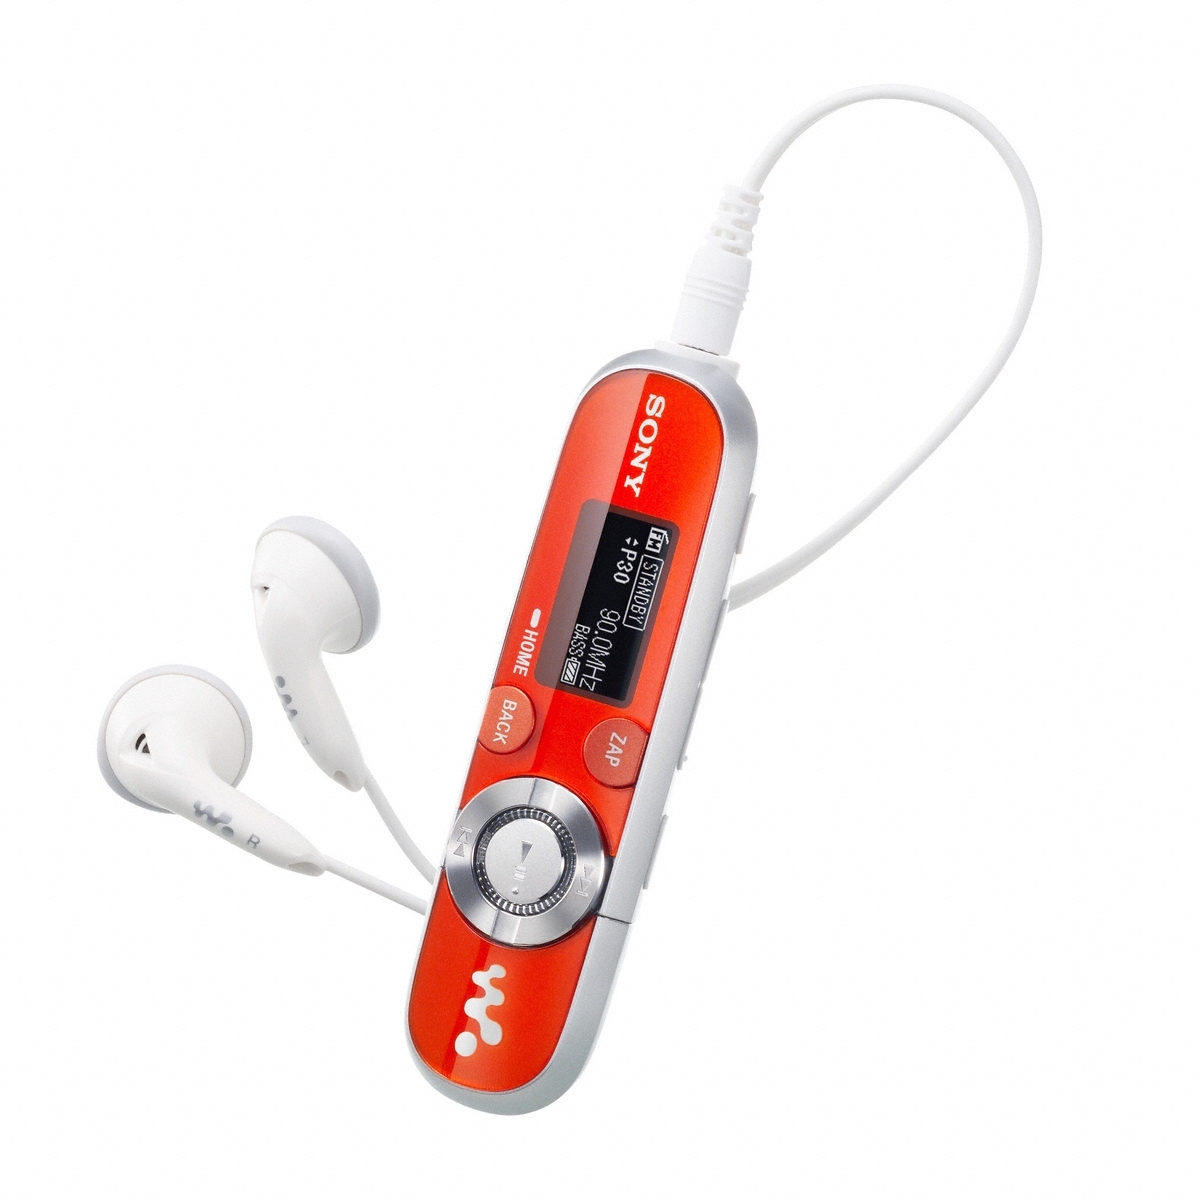  Review on Hitech Review    Photos    Sony Walkman B Series Mp3 Players